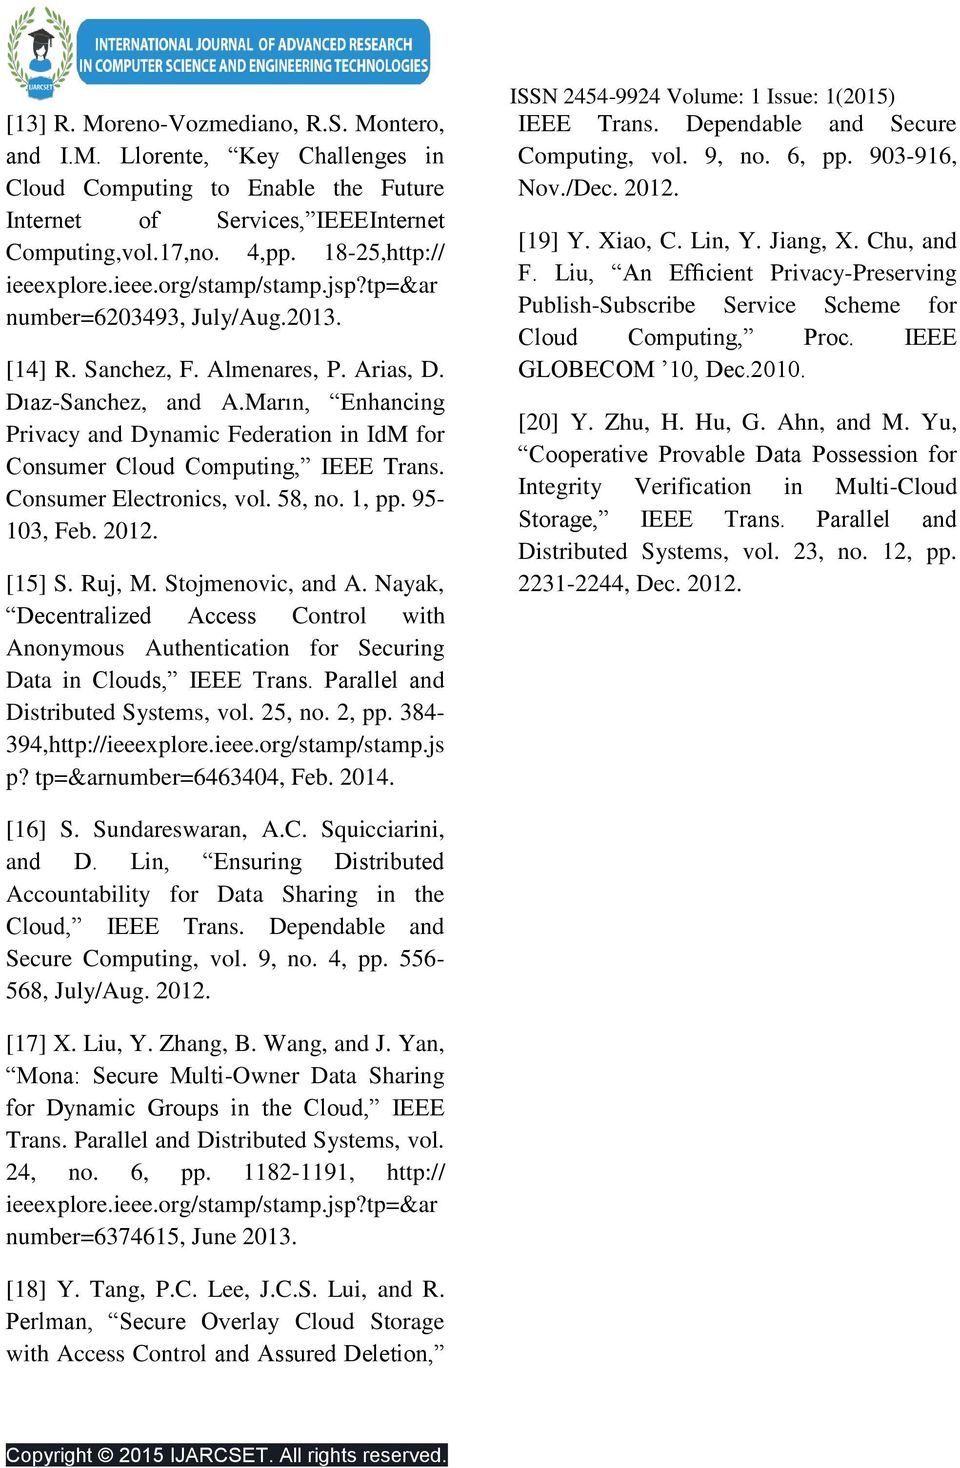 Marın, Enhancing Privacy and Dynamic Federation in IdM for Consumer Cloud Computing, IEEE Trans. Consumer Electronics, vol. 58, no. 1, pp. 95-103, Feb. 2012. [15] S. Ruj, M. Stojmenovic, and A.